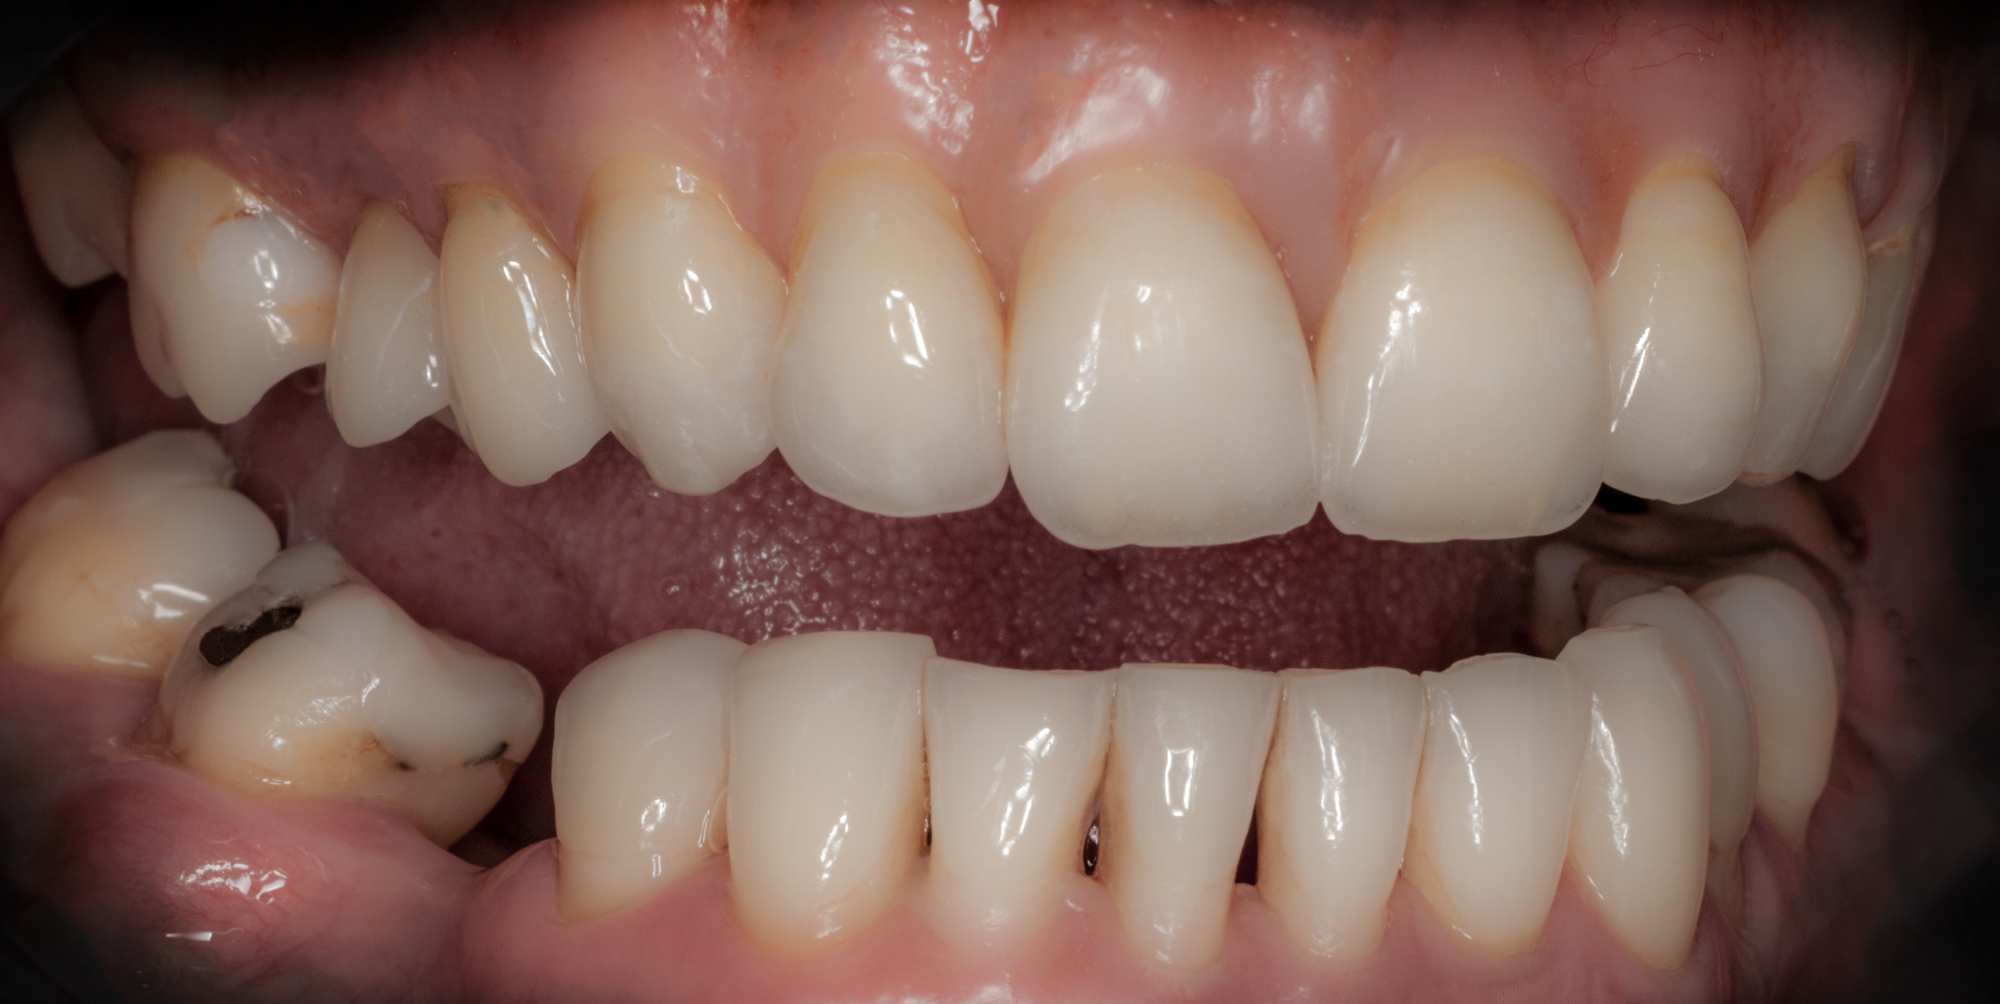 _RCW7478 Lateral-View of beautiful Full Denture by Ron Winter @ Seaside Dental Laboratory & Clinic Takapuna Auckland.jpg